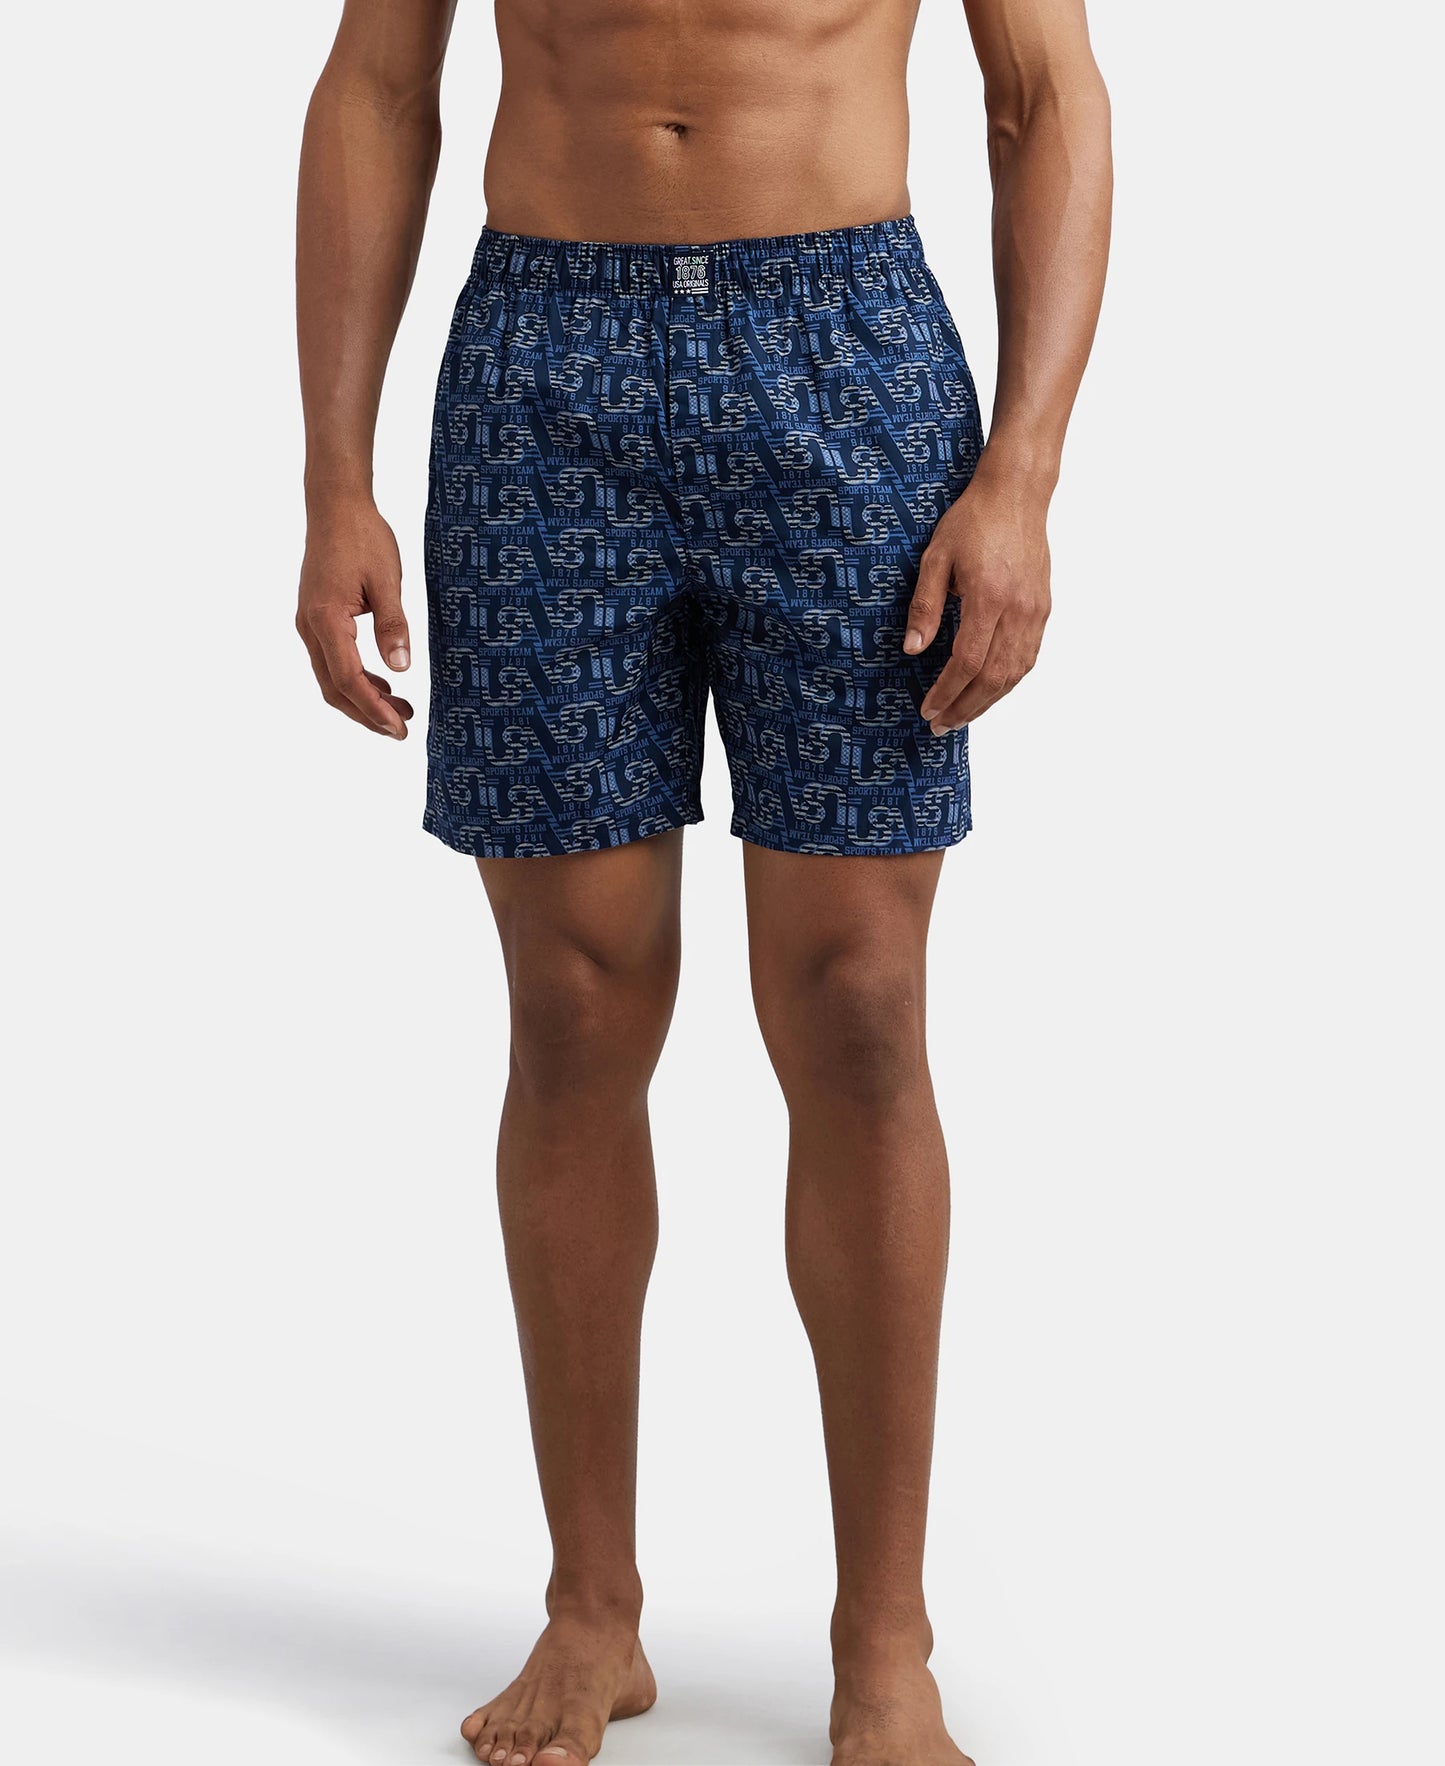 Super Combed Mercerized Cotton Woven Printed Boxer Shorts with Side Pocket - Navy Nickle-10